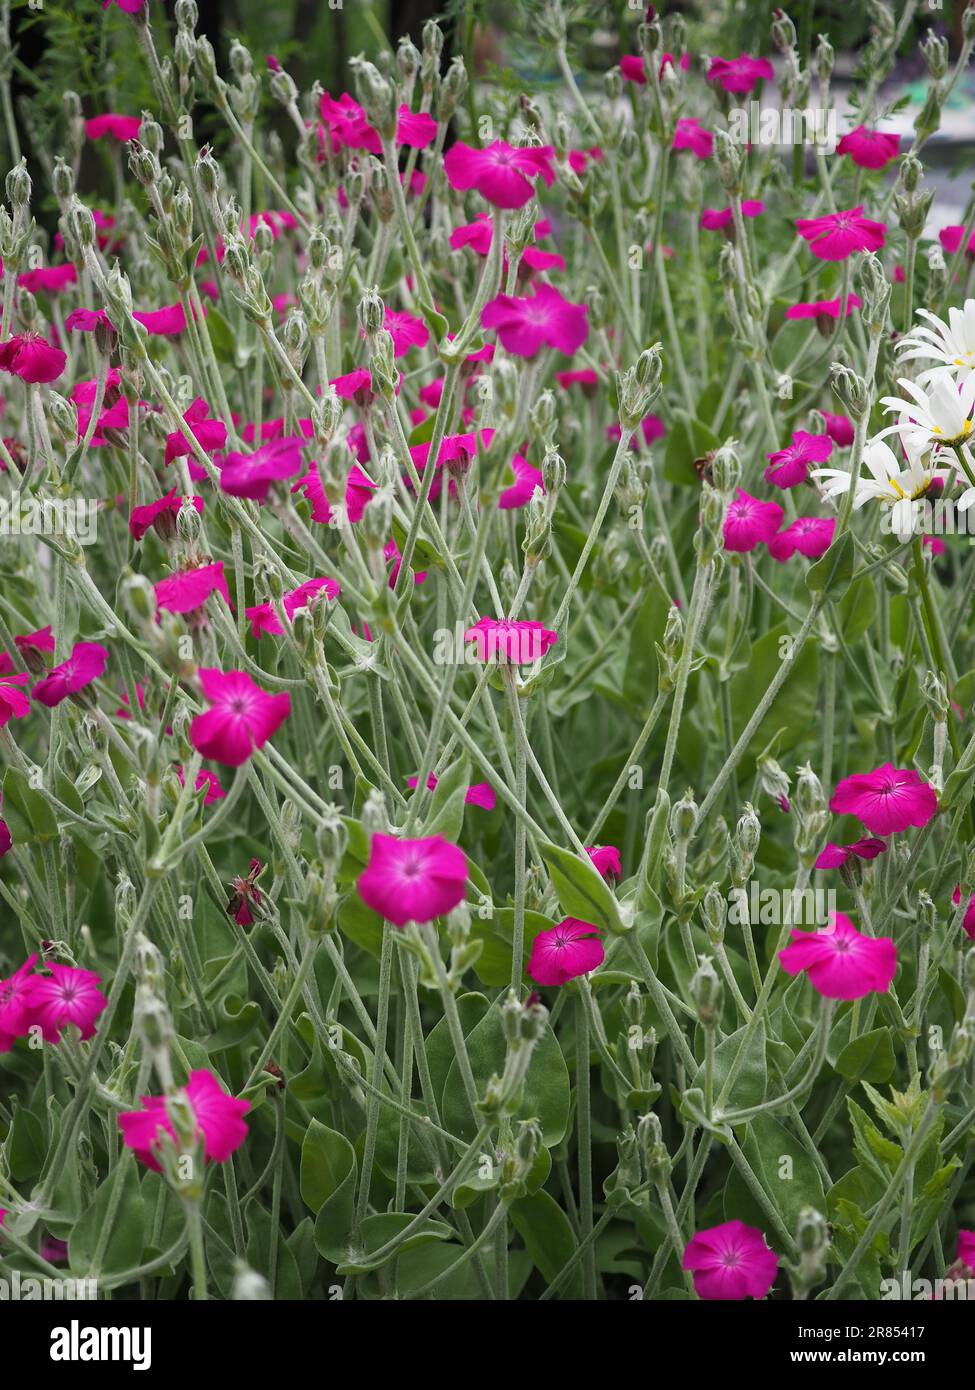 A carpet of bright pink rose campion flowers (Lychnis coronaria) and their silver foliage in a cottage garden in England in June Stock Photo